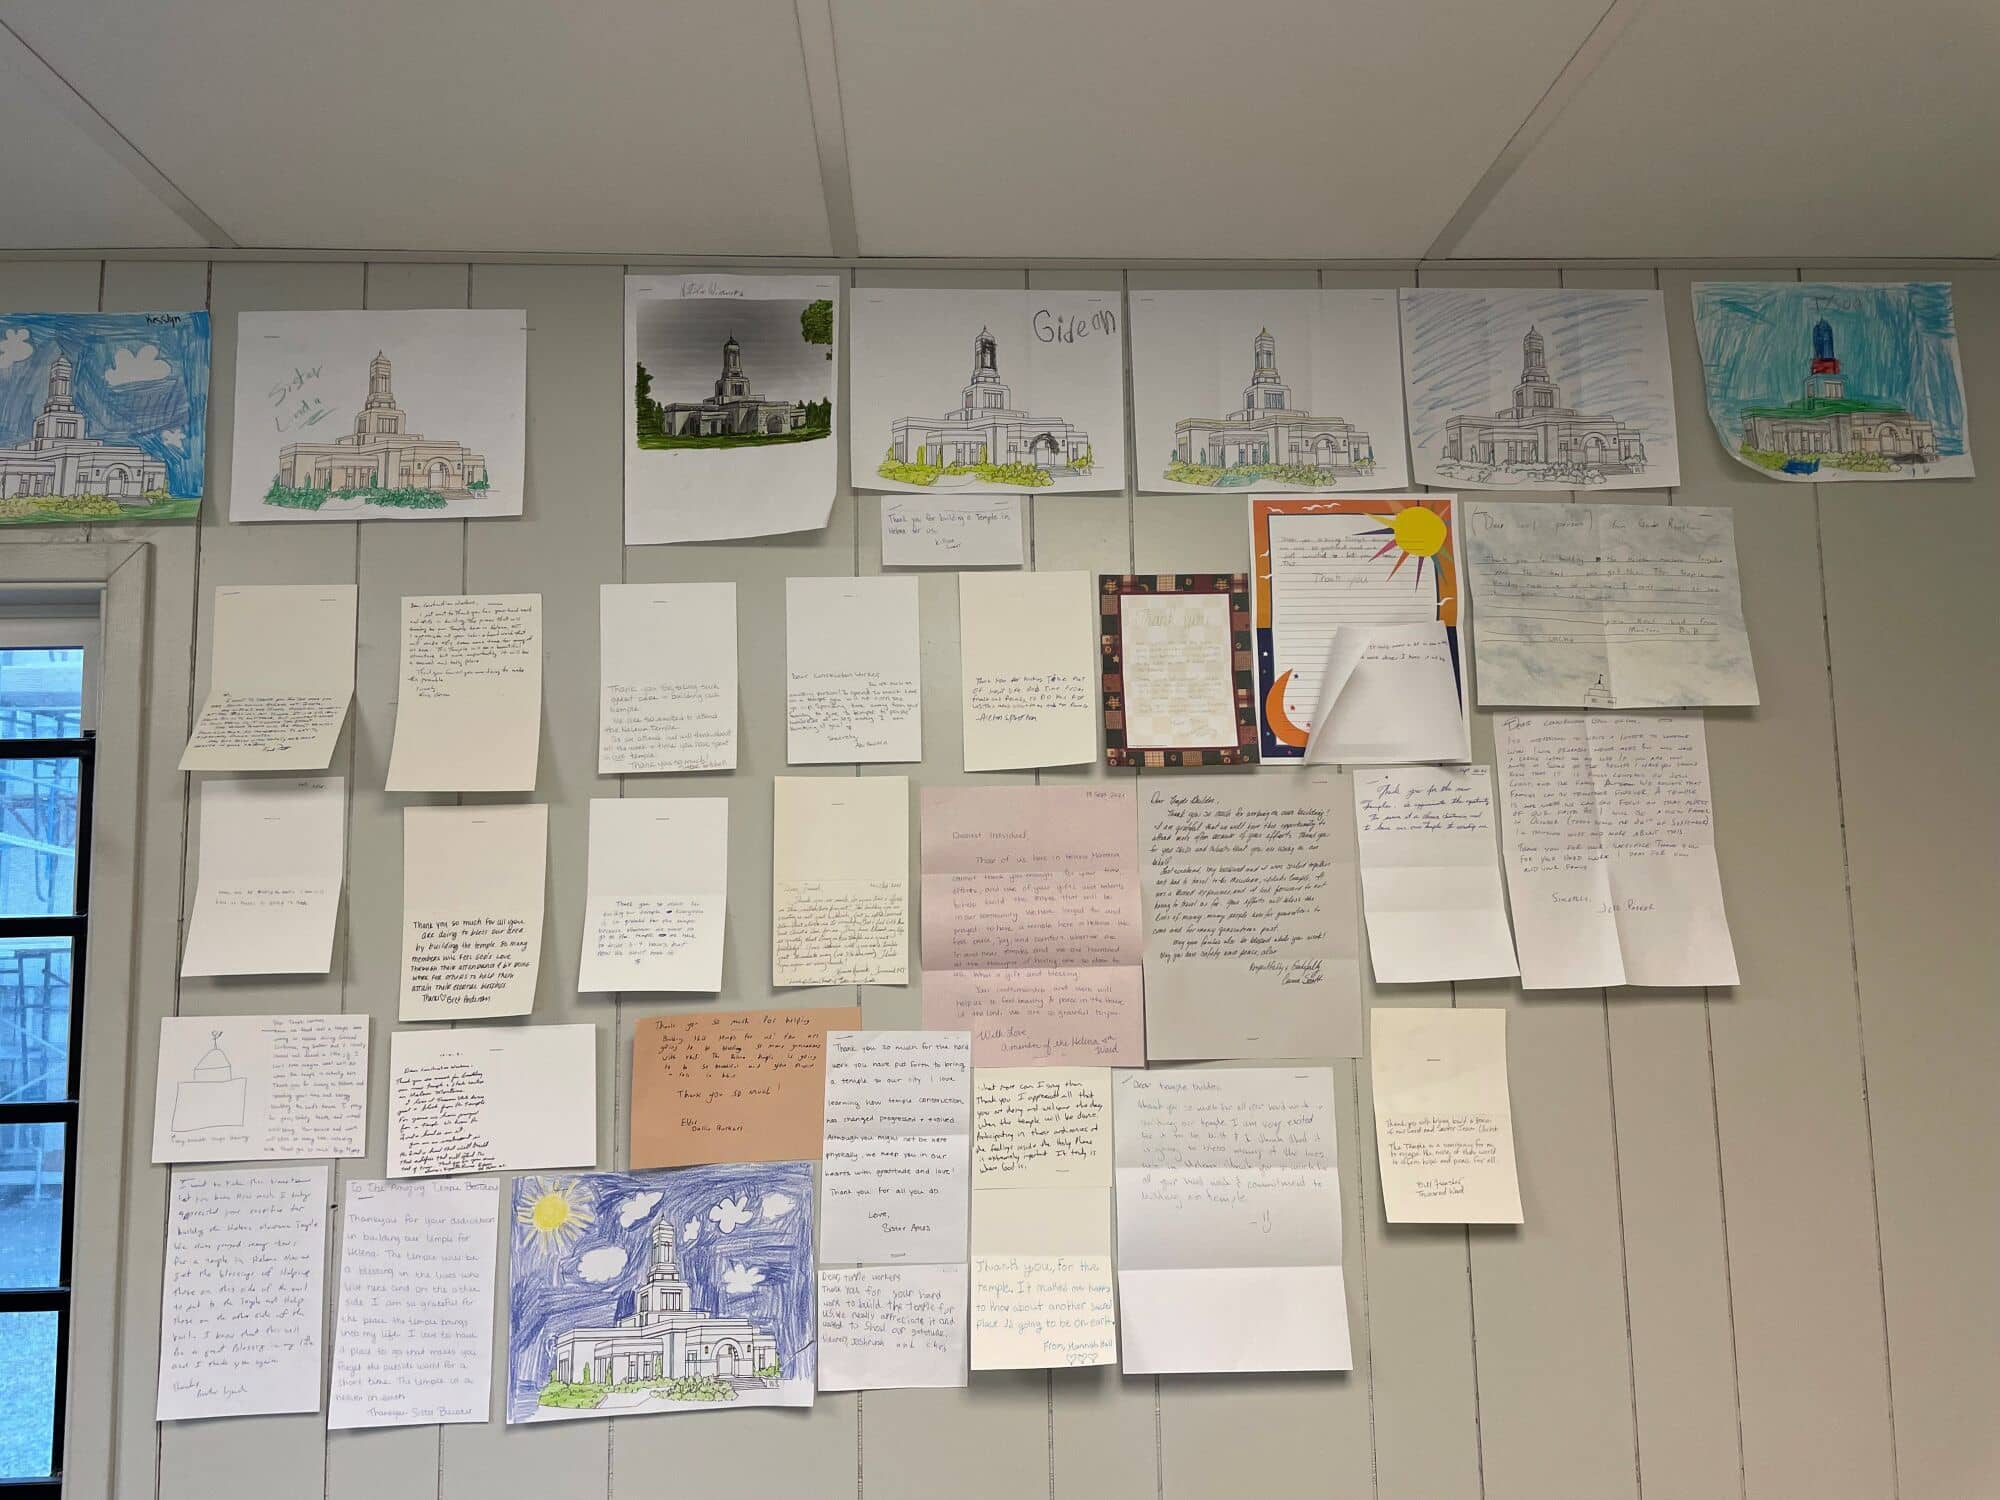 Many thank-you letters and colored pictures of the Helena Montana Temple hanging on walls.